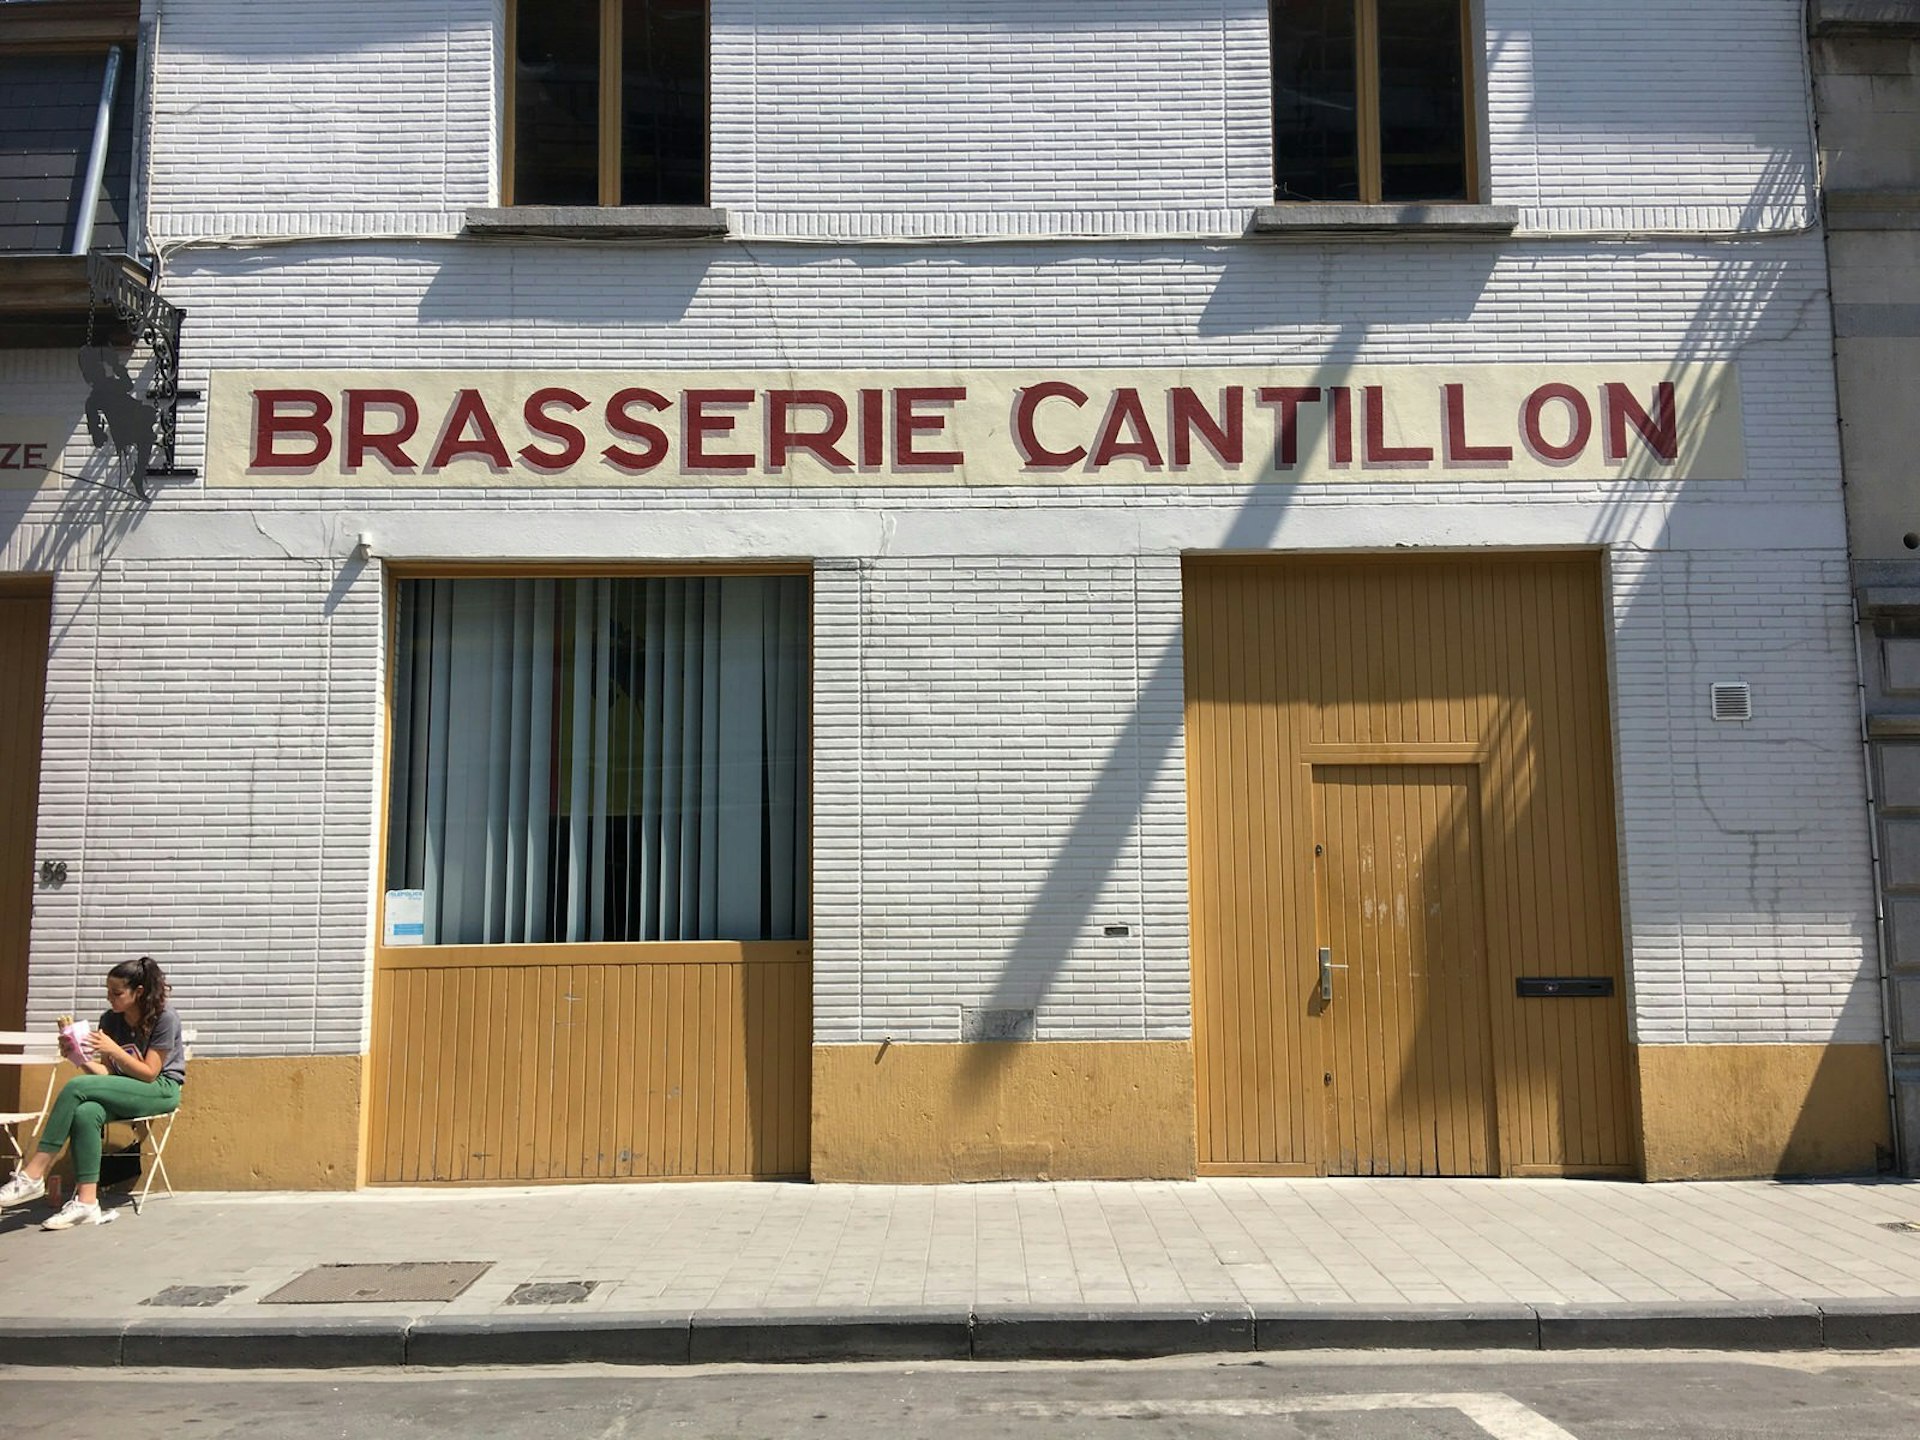 Brasserie Cantillon facade - A two-storey building with large square windows. The bottom of the building is painted a dusty yellow and 'BRASSERIE CANTILLON' is painted in capital red letters above the yellow door. A woman is sitting at a table outside having a beer. 